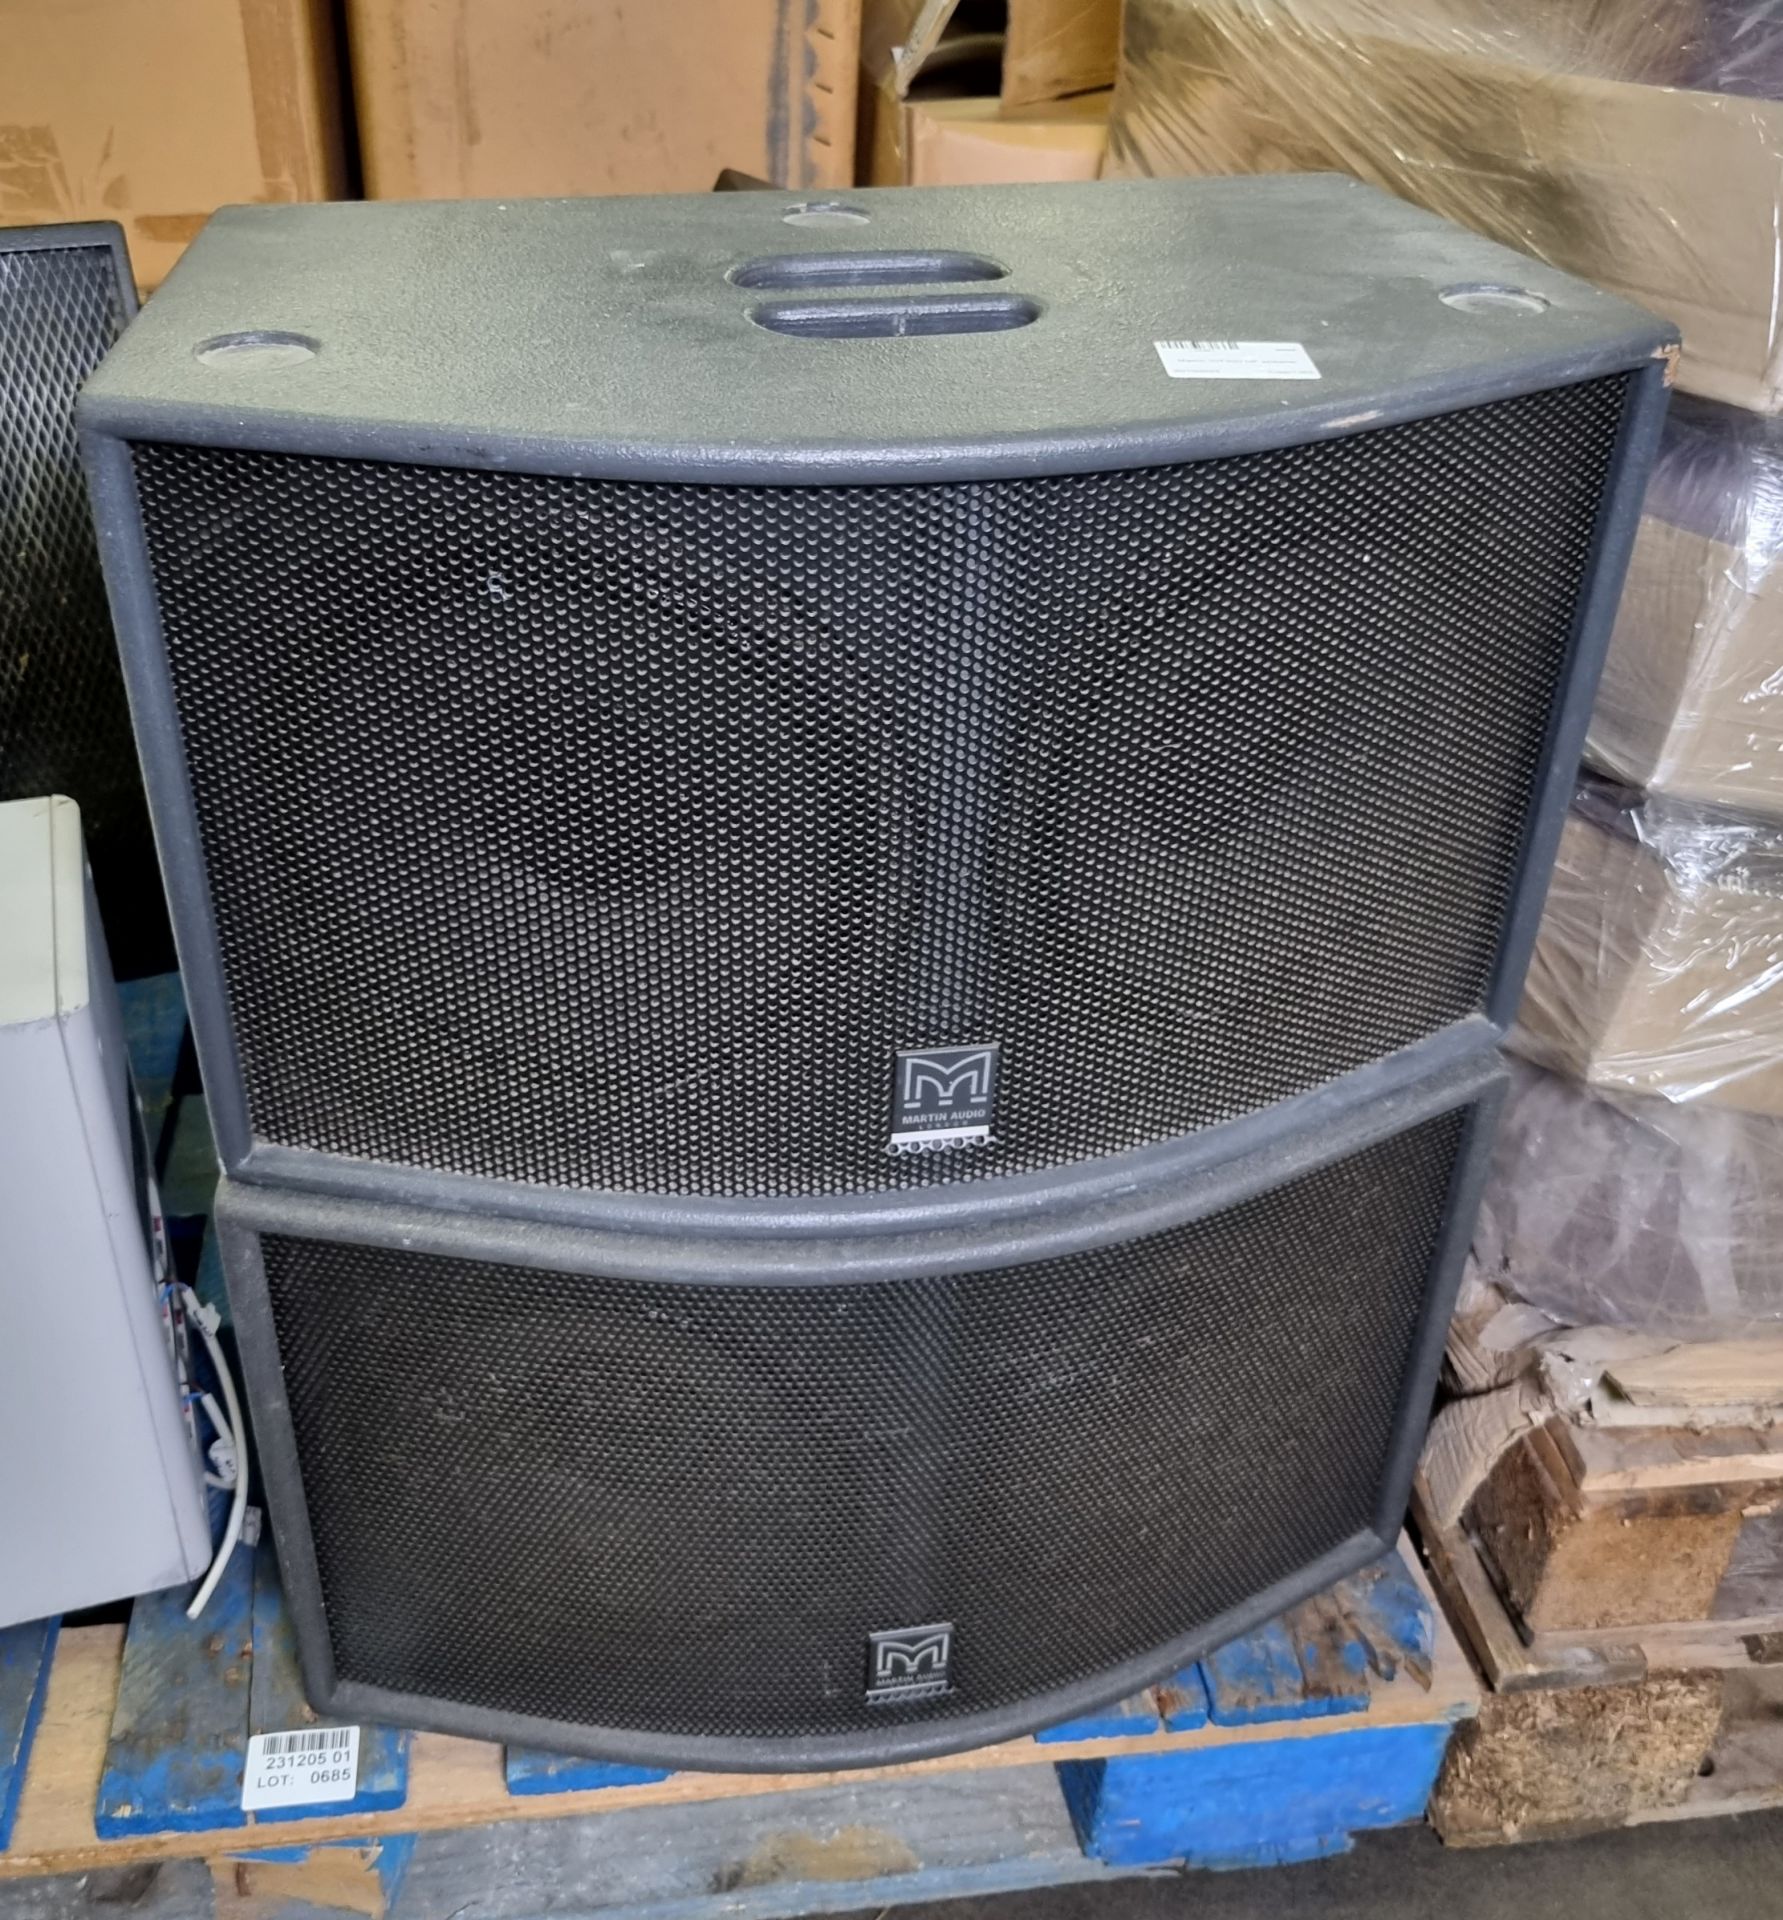 2x Martin ICT300 HF speakers, Dare Micro 88 dual wall speaker - MISSING FRONT MESH - Image 3 of 6